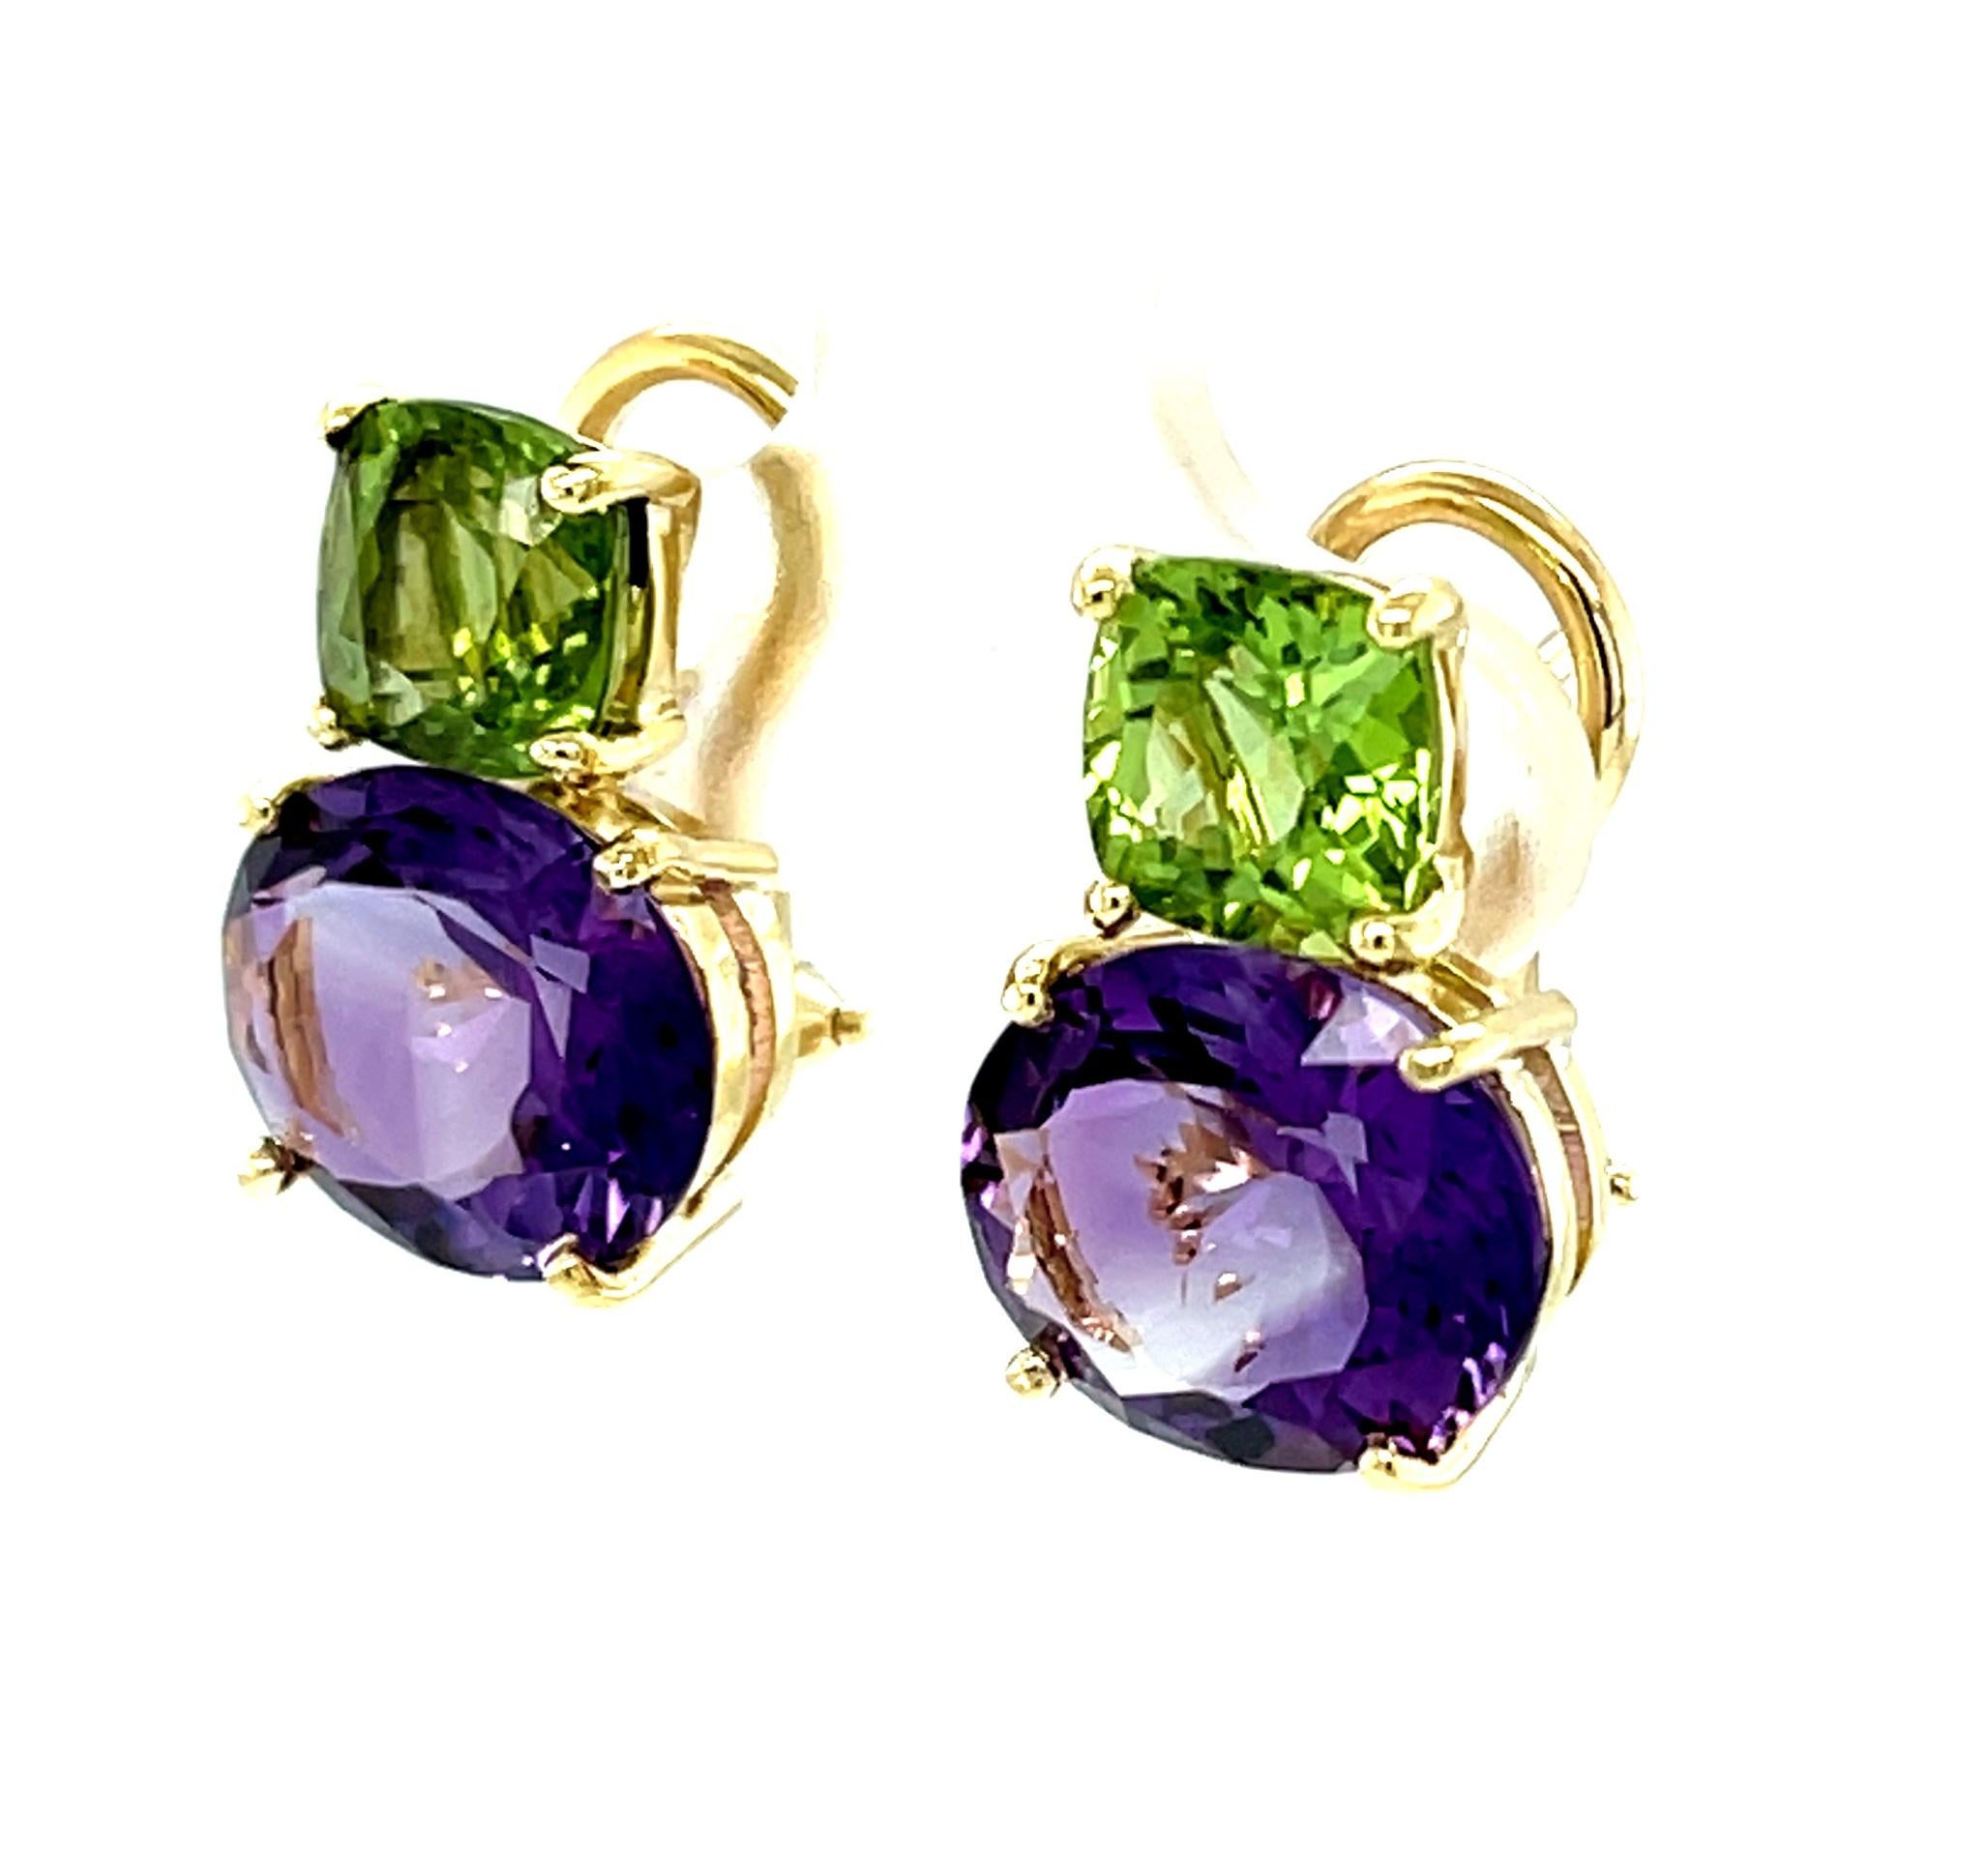 Artisan Peridot and Amethyst Earrings in 18k Yellow Gold with French Backs For Sale